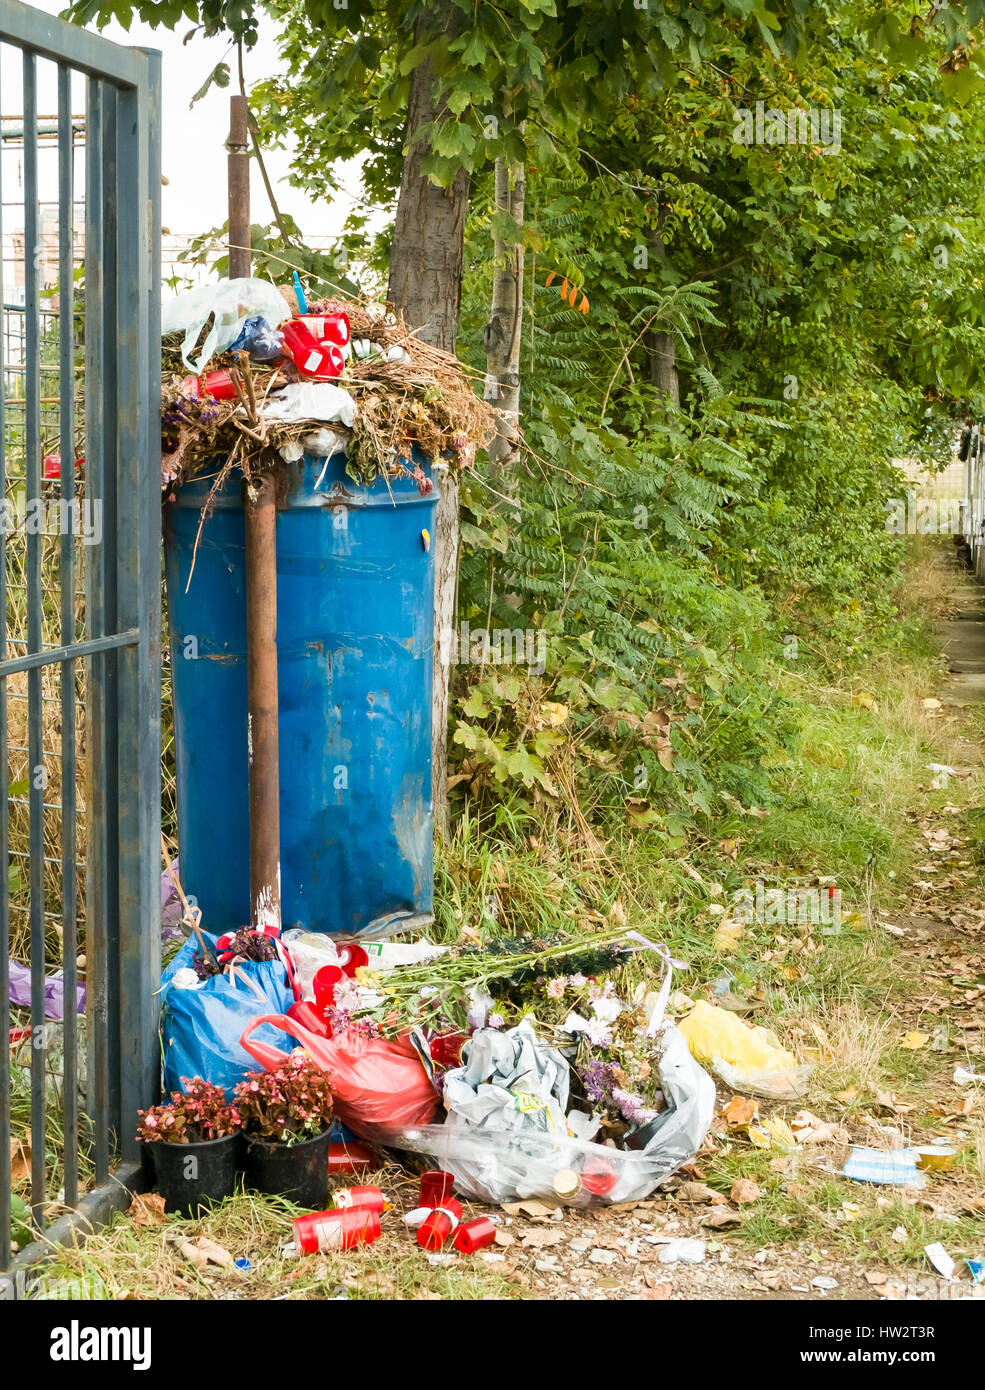 https://c8.alamy.com/comp/HW2T3R/overfilled-trash-container-at-the-entrance-of-a-romanian-cemetery-HW2T3R.jpg